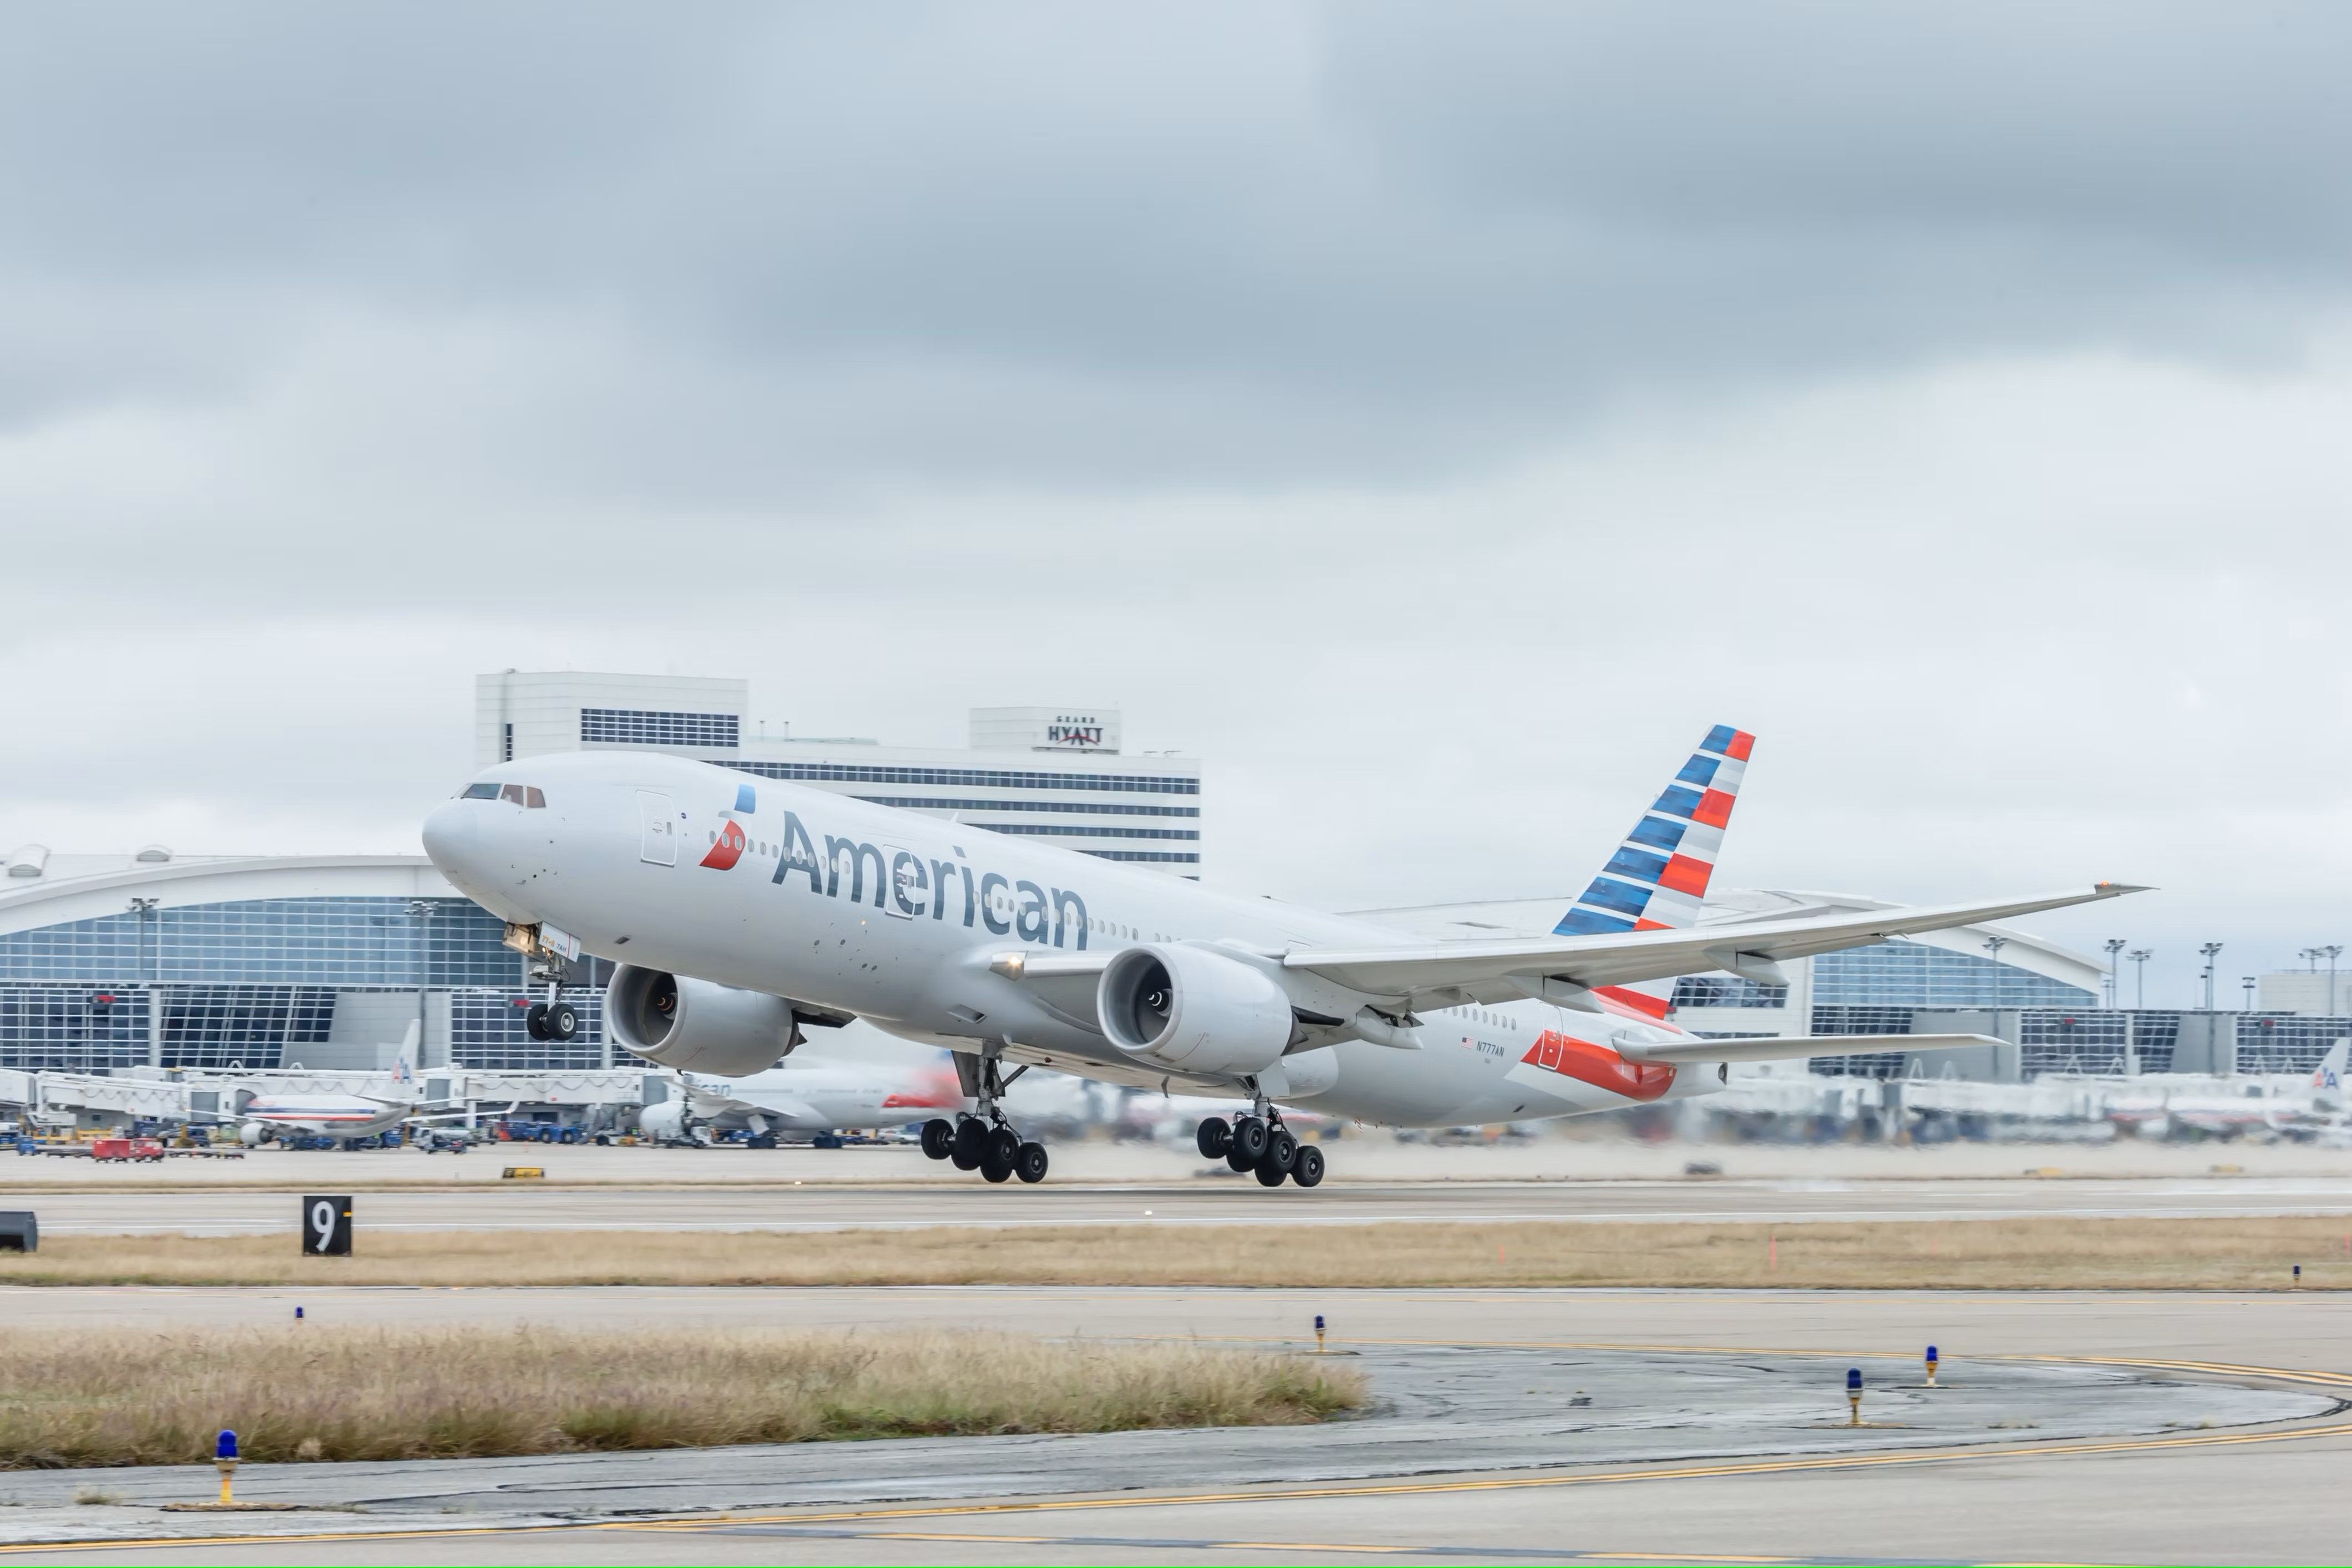 An American Airlines aircraft taking off at DFW.